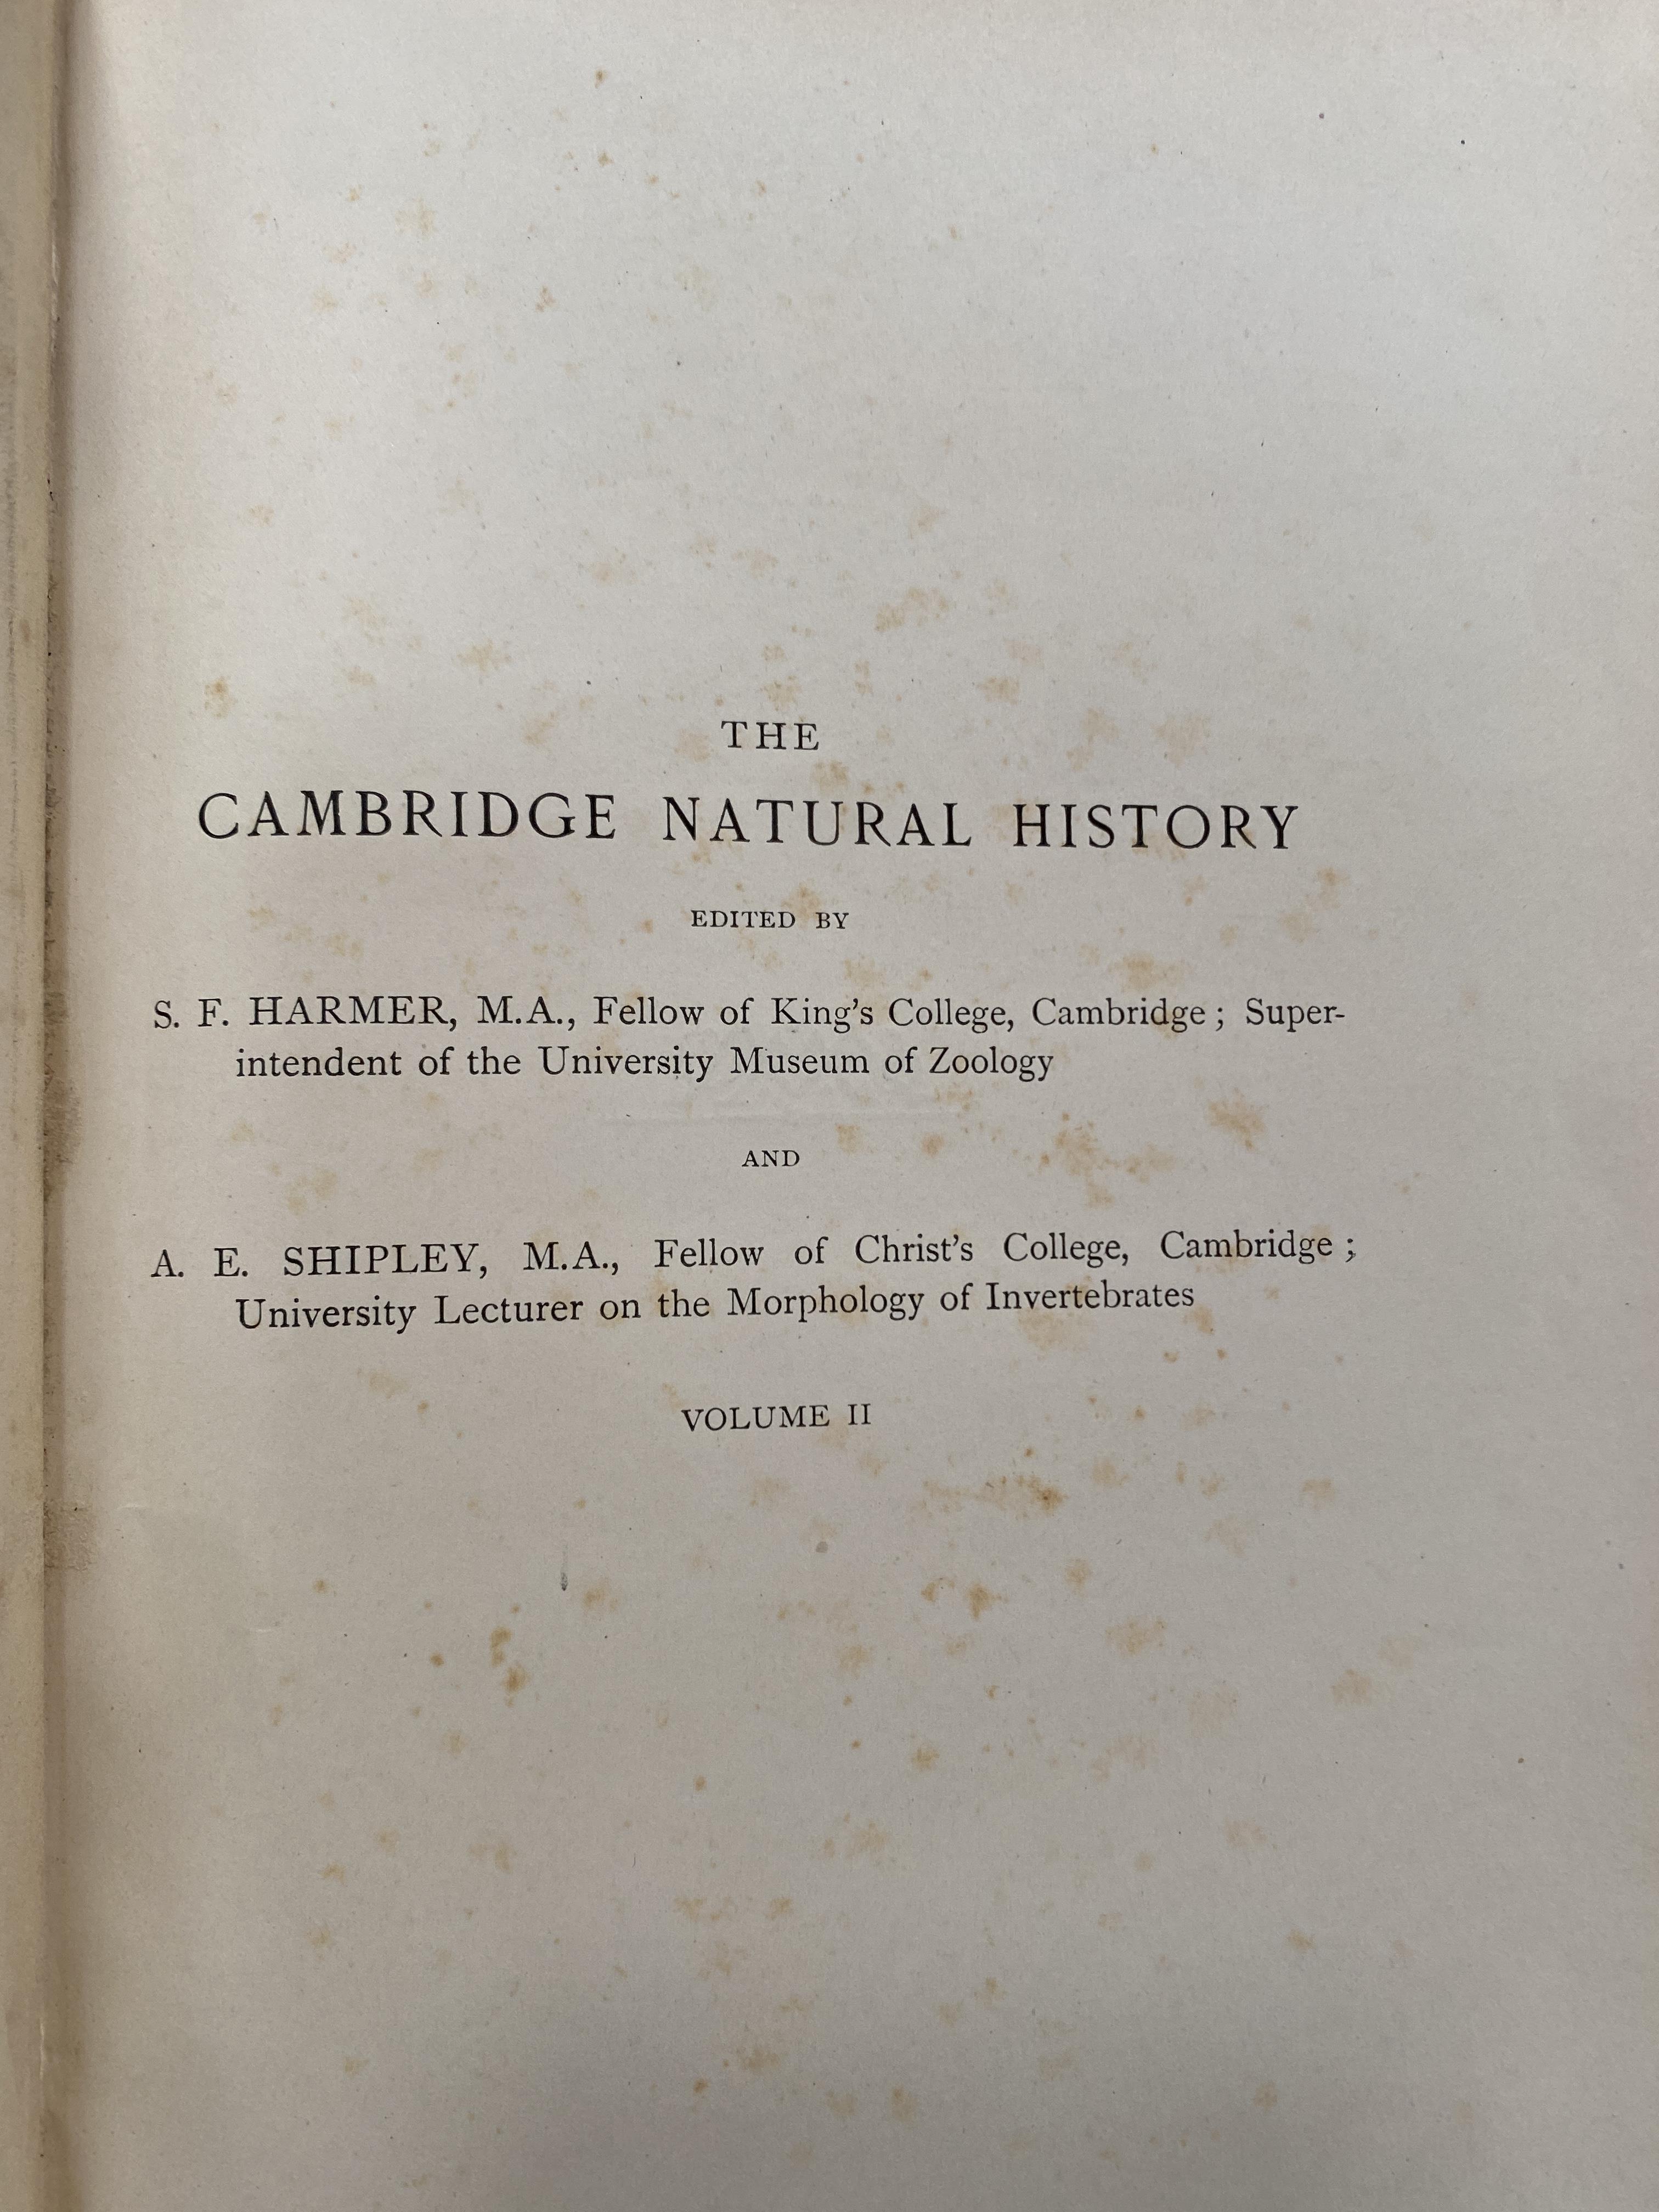 The Cambridge Natural History, eight volume set - Image 2 of 4